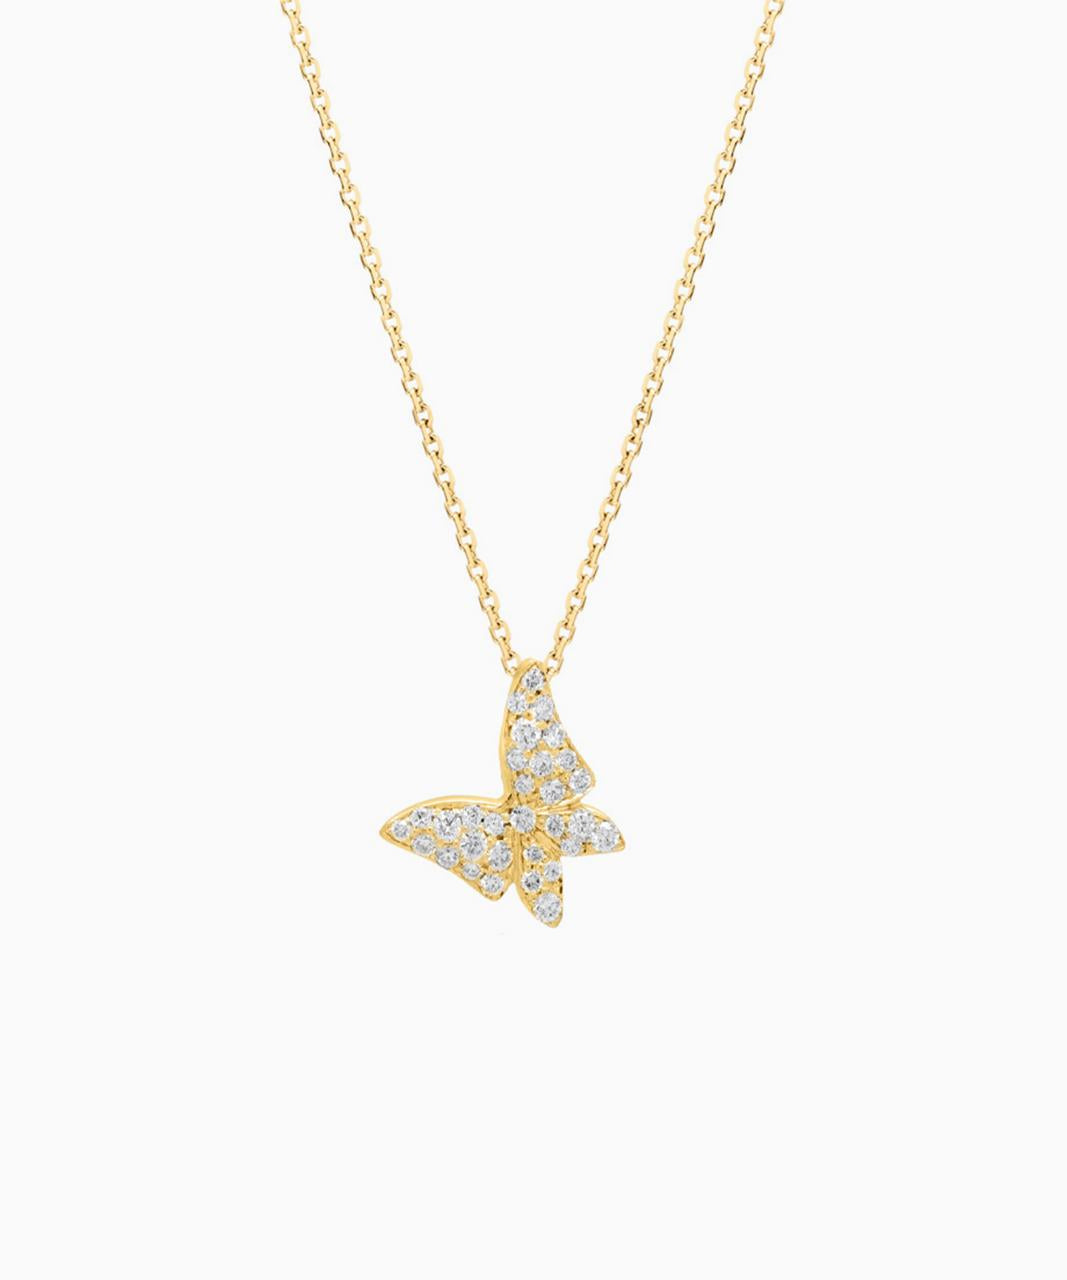 White Butterfly Diamond Necklace - Medio